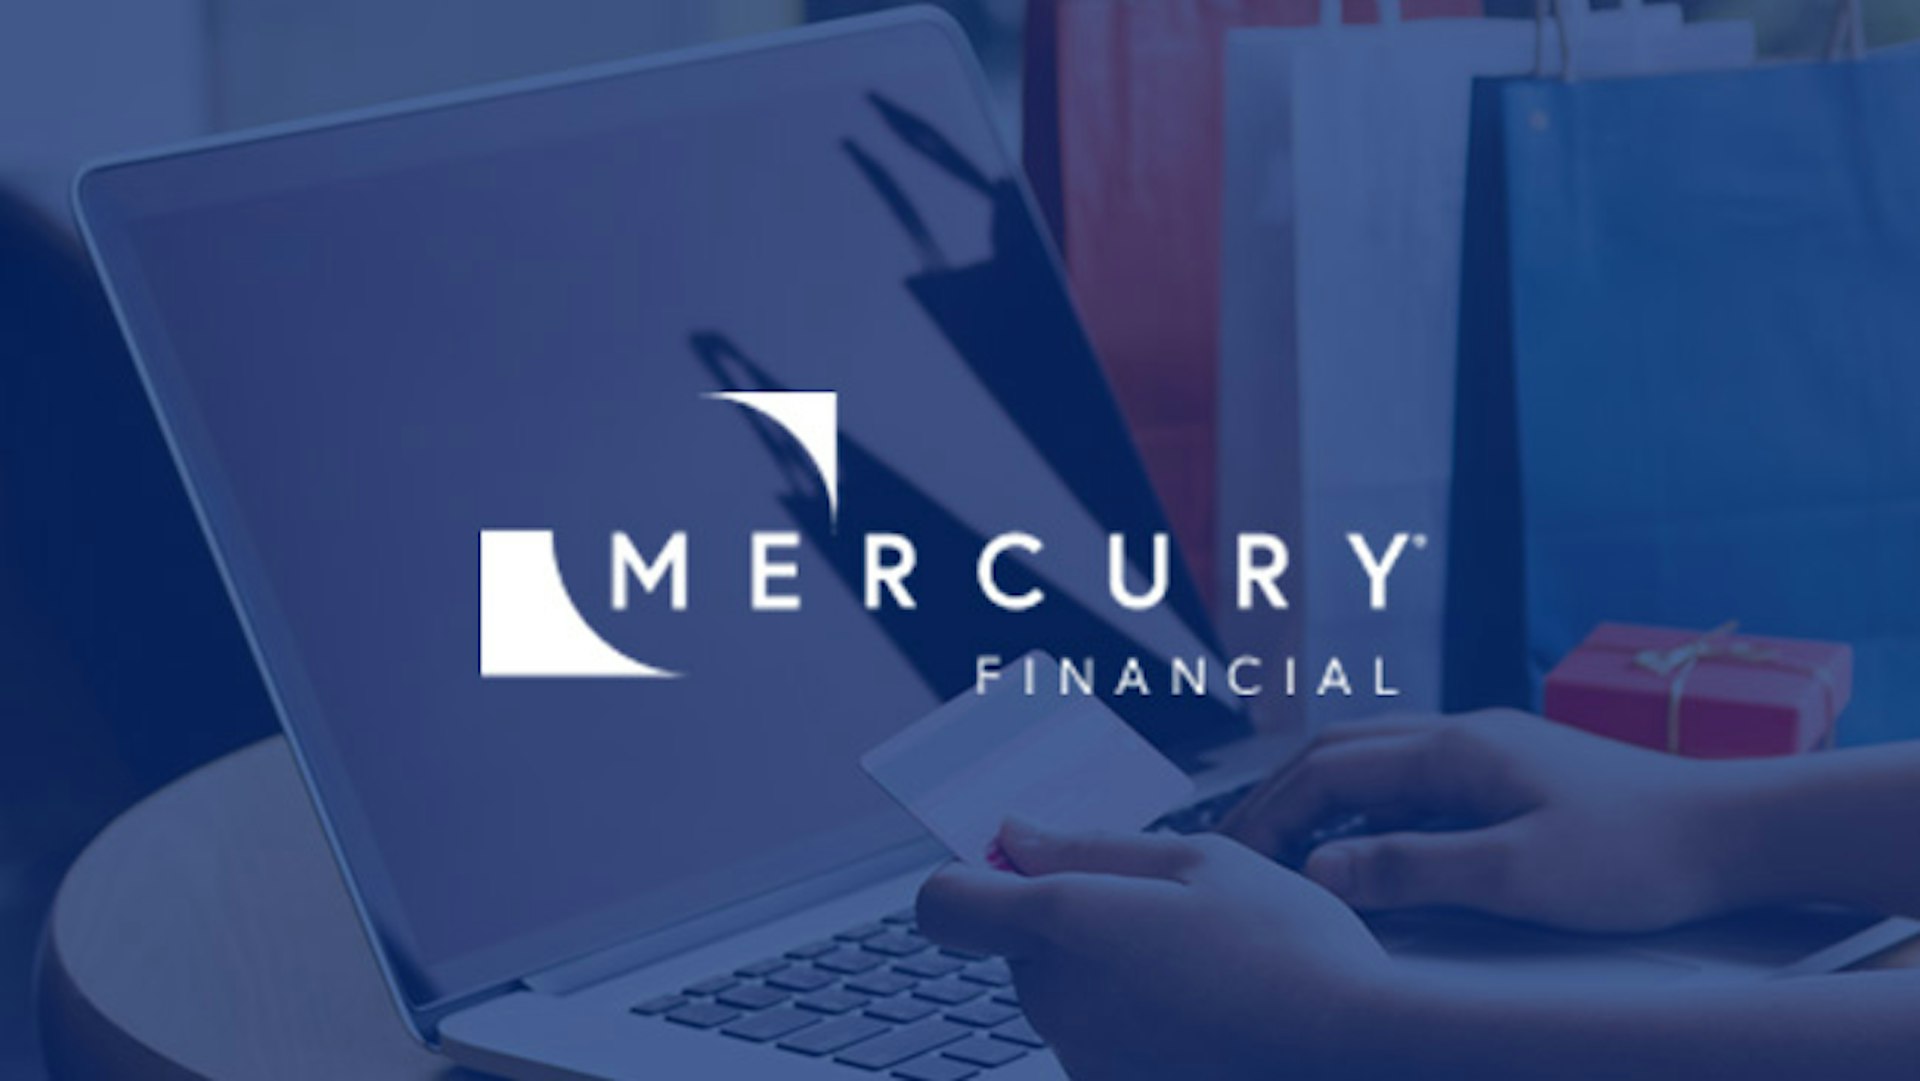 Mercury Financial Improves Security and Efficiency with the Zscaler Zero Trust Exchange